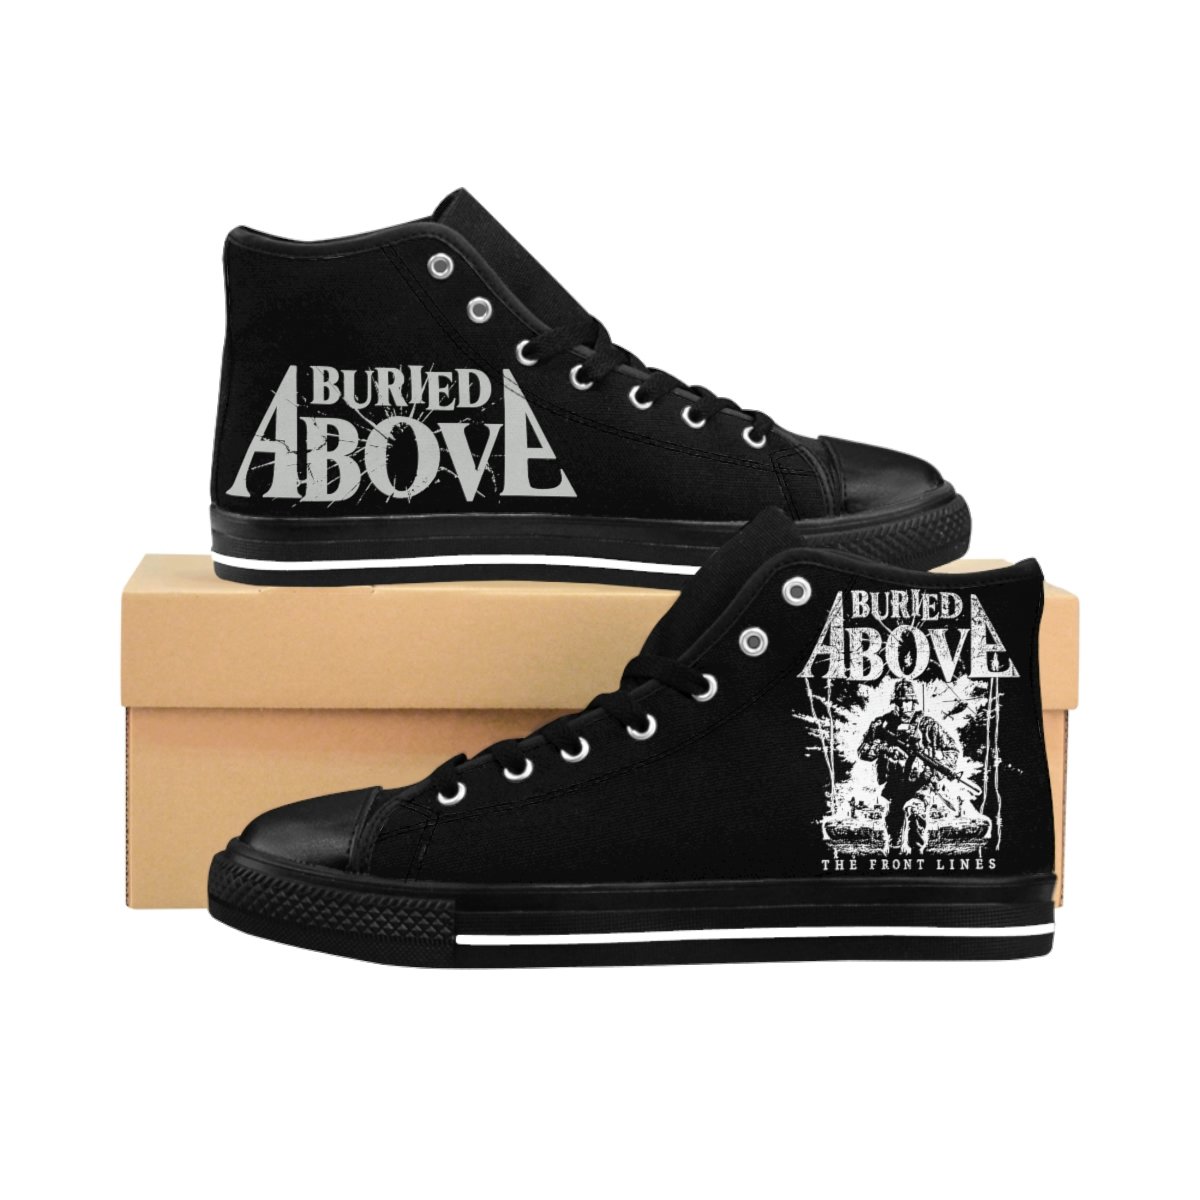 Buried Above – The Front Lines Women’s High-top Sneakers